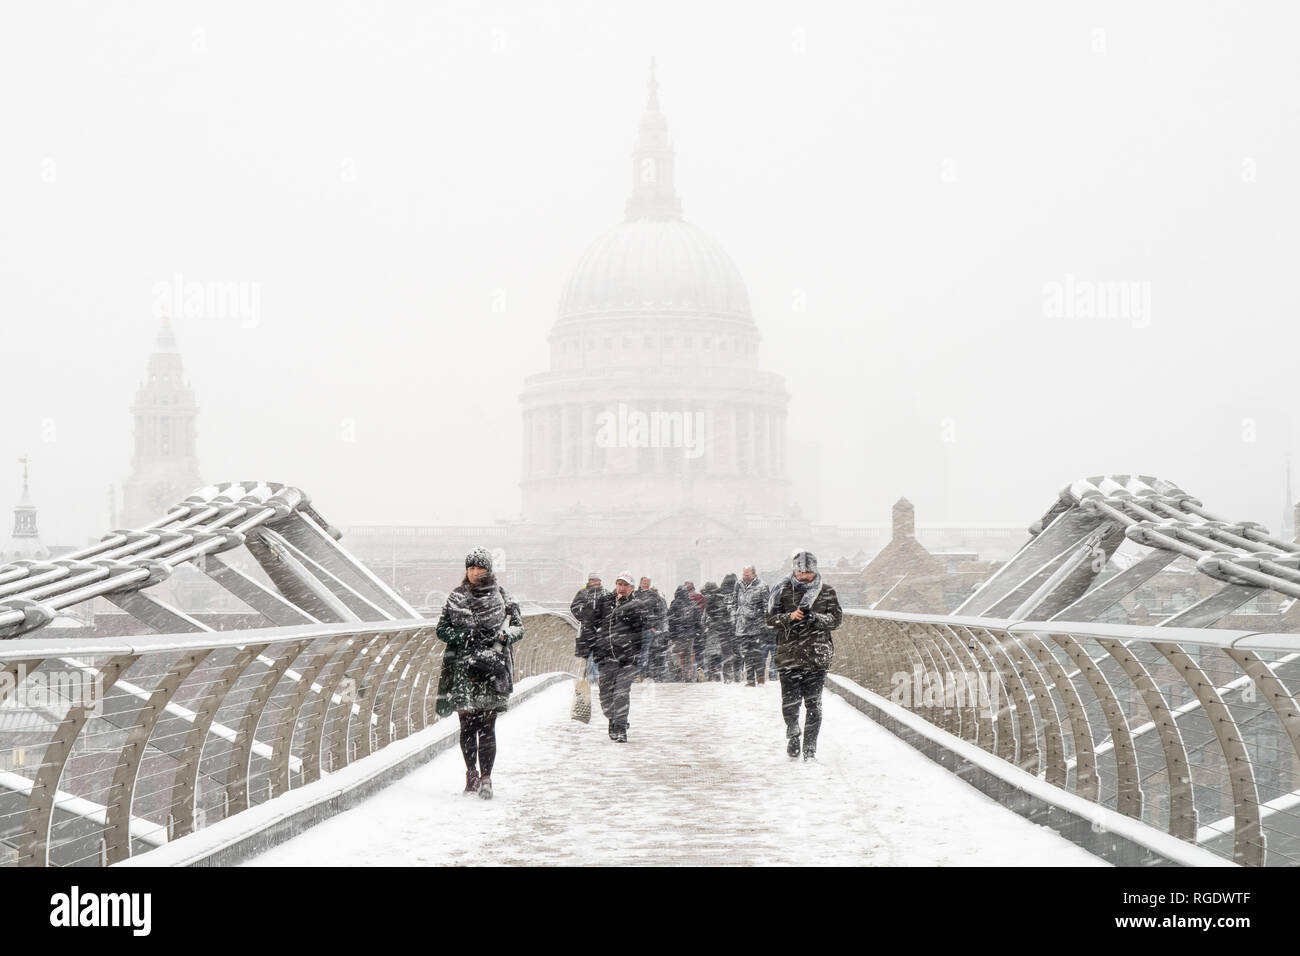 London, UK - March 1st 2018: St Paul's & the Millennium Bridge seen from the bridge in the midst of a snow storm during a sudden cold snap. Stock Photo